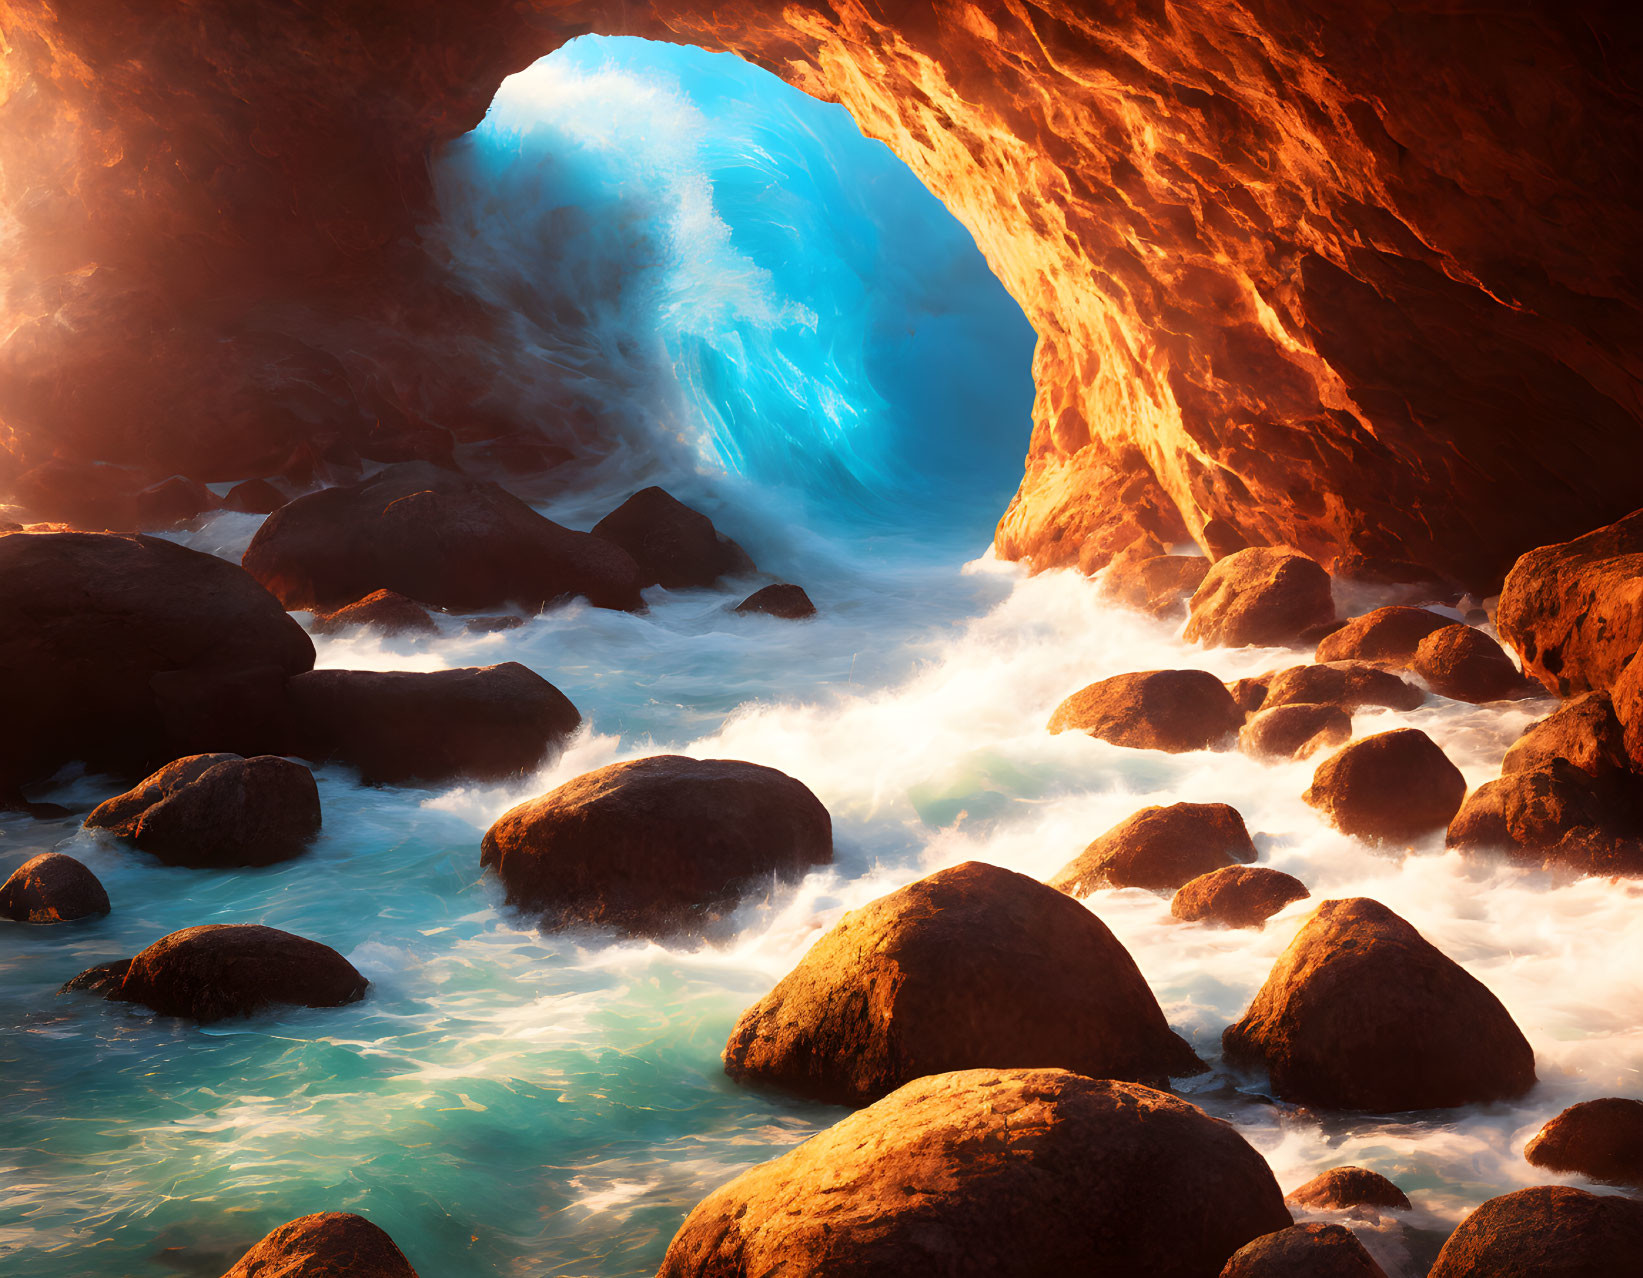 Sunlit rocky sea cave with captivating blue glow and frothy waves.